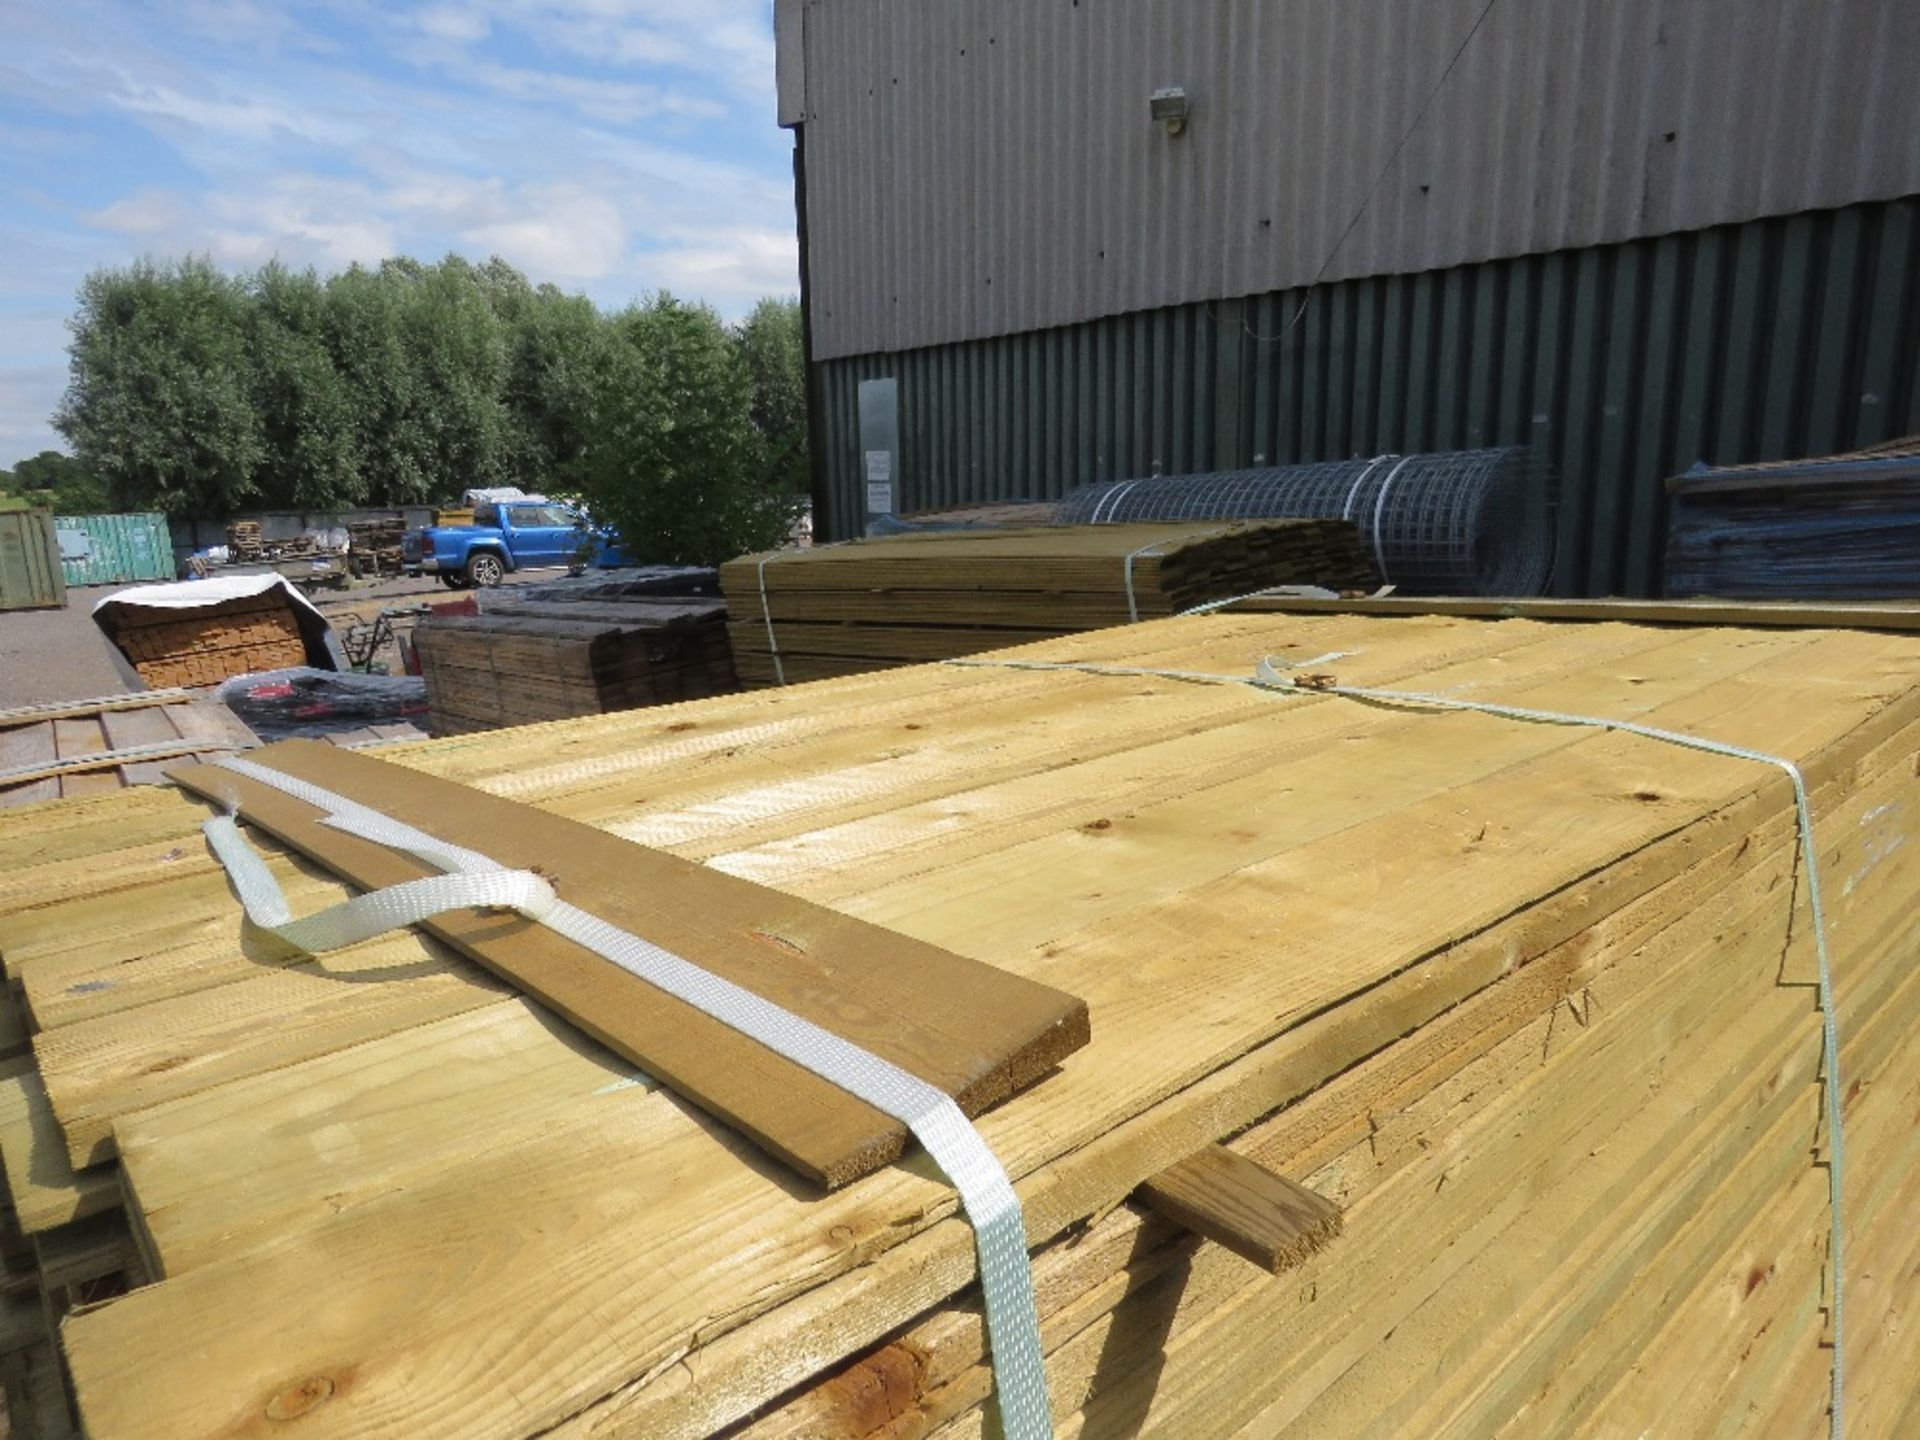 LARGE PACK OF TREATED FEATHER EDGE FENCE CLADDING TIMBER BOARDS, 1.64M LENGTH X 10CM WIDTH APPROX. - Image 2 of 3